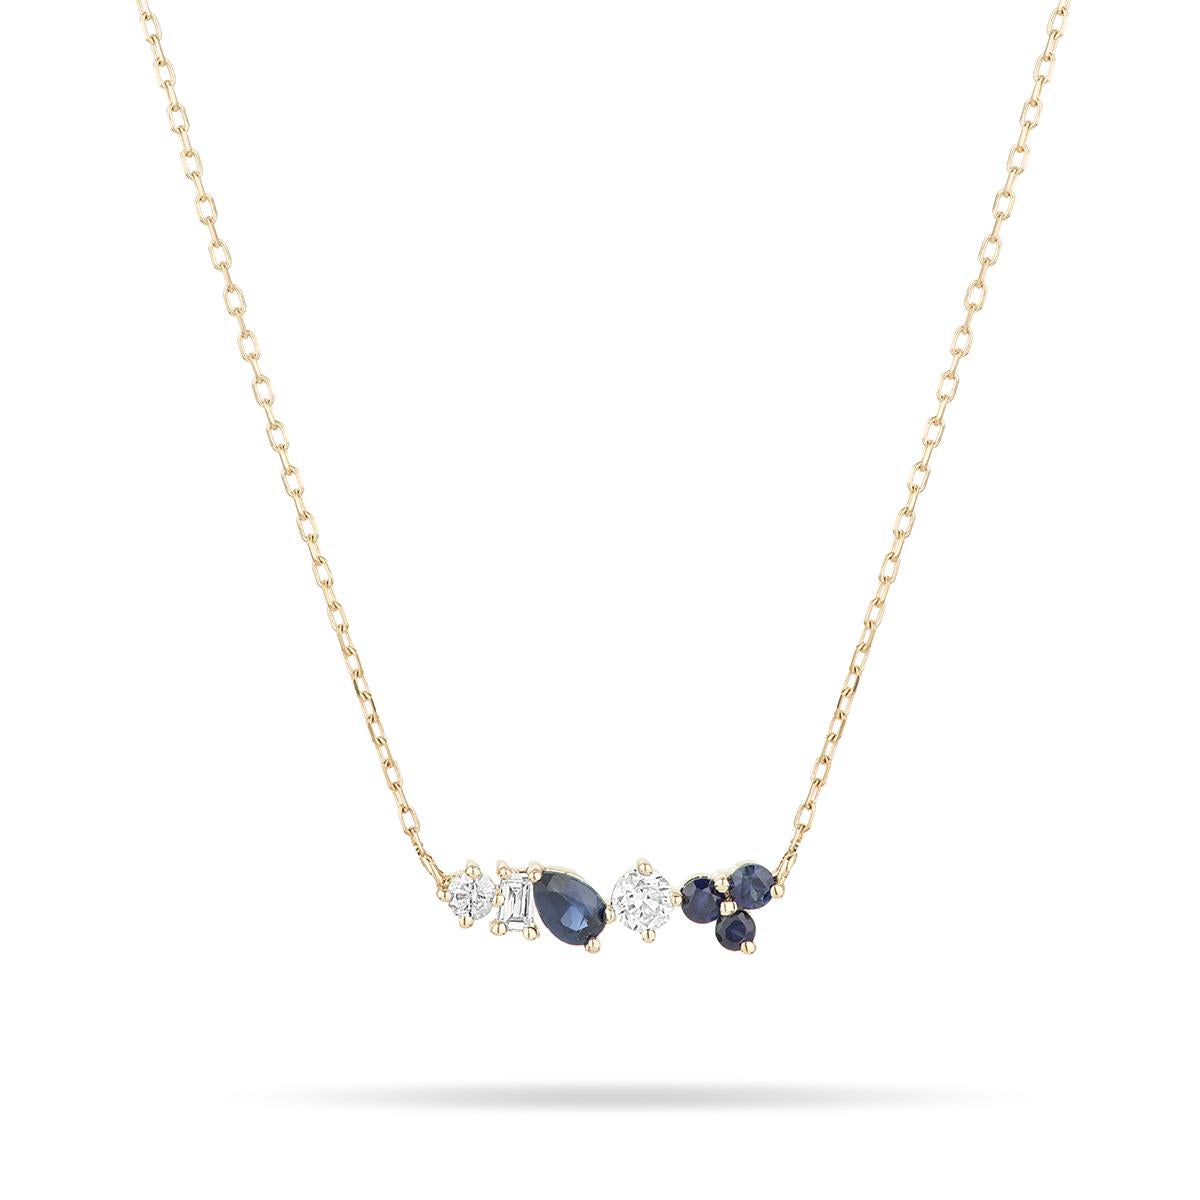 Adina Reyter Diana Sapphire + Diamond Scattered Necklace - Y14

A unique mix of royal blue sapphires and brilliant white diamonds that sit together in a perfect row.

The Diana Sapphire + Diamond Scattered Necklace features a 14k yellow gold chain